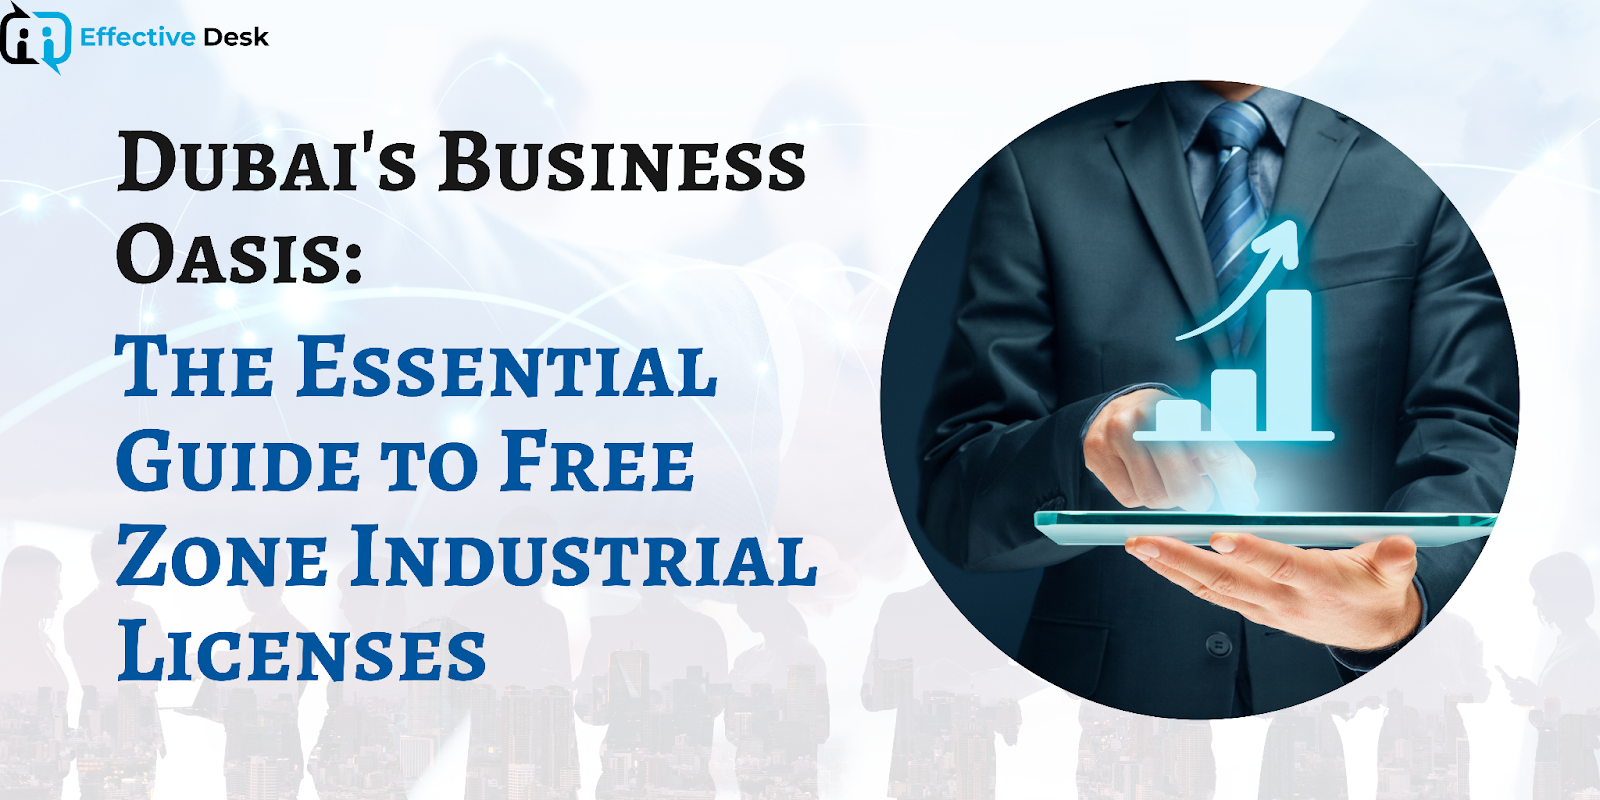 Dubai's Business Oasis: The Essential Guide to Free Zone Industrial Licenses